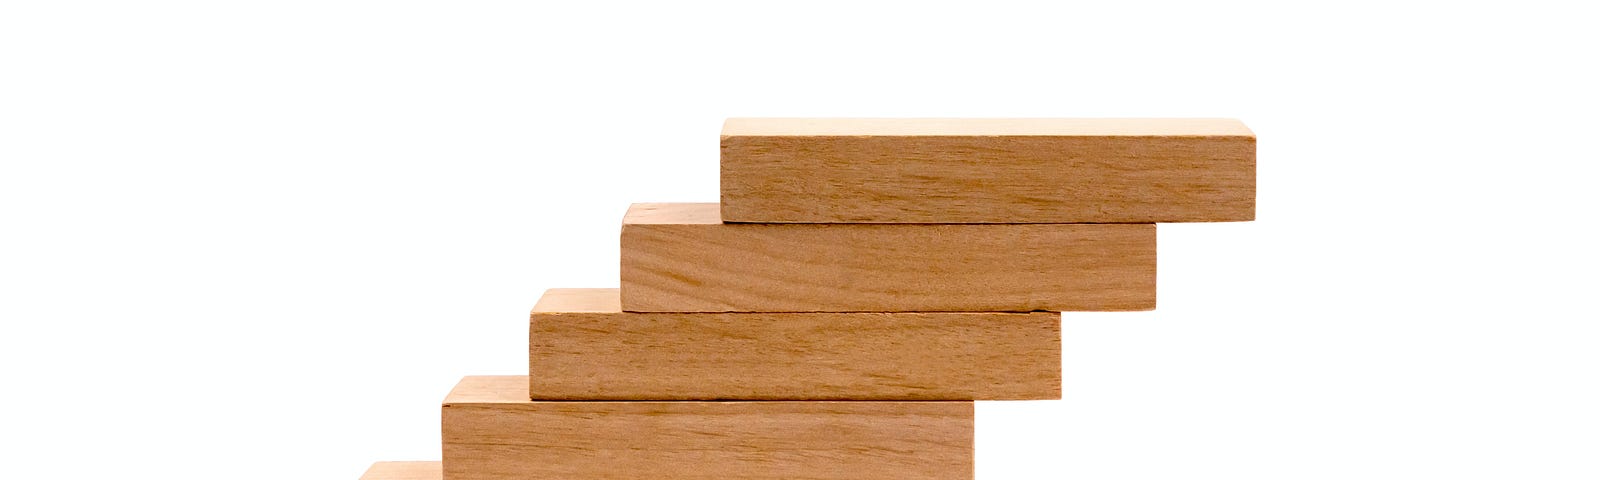 wooden blocks one on top of the others, forming a ladder